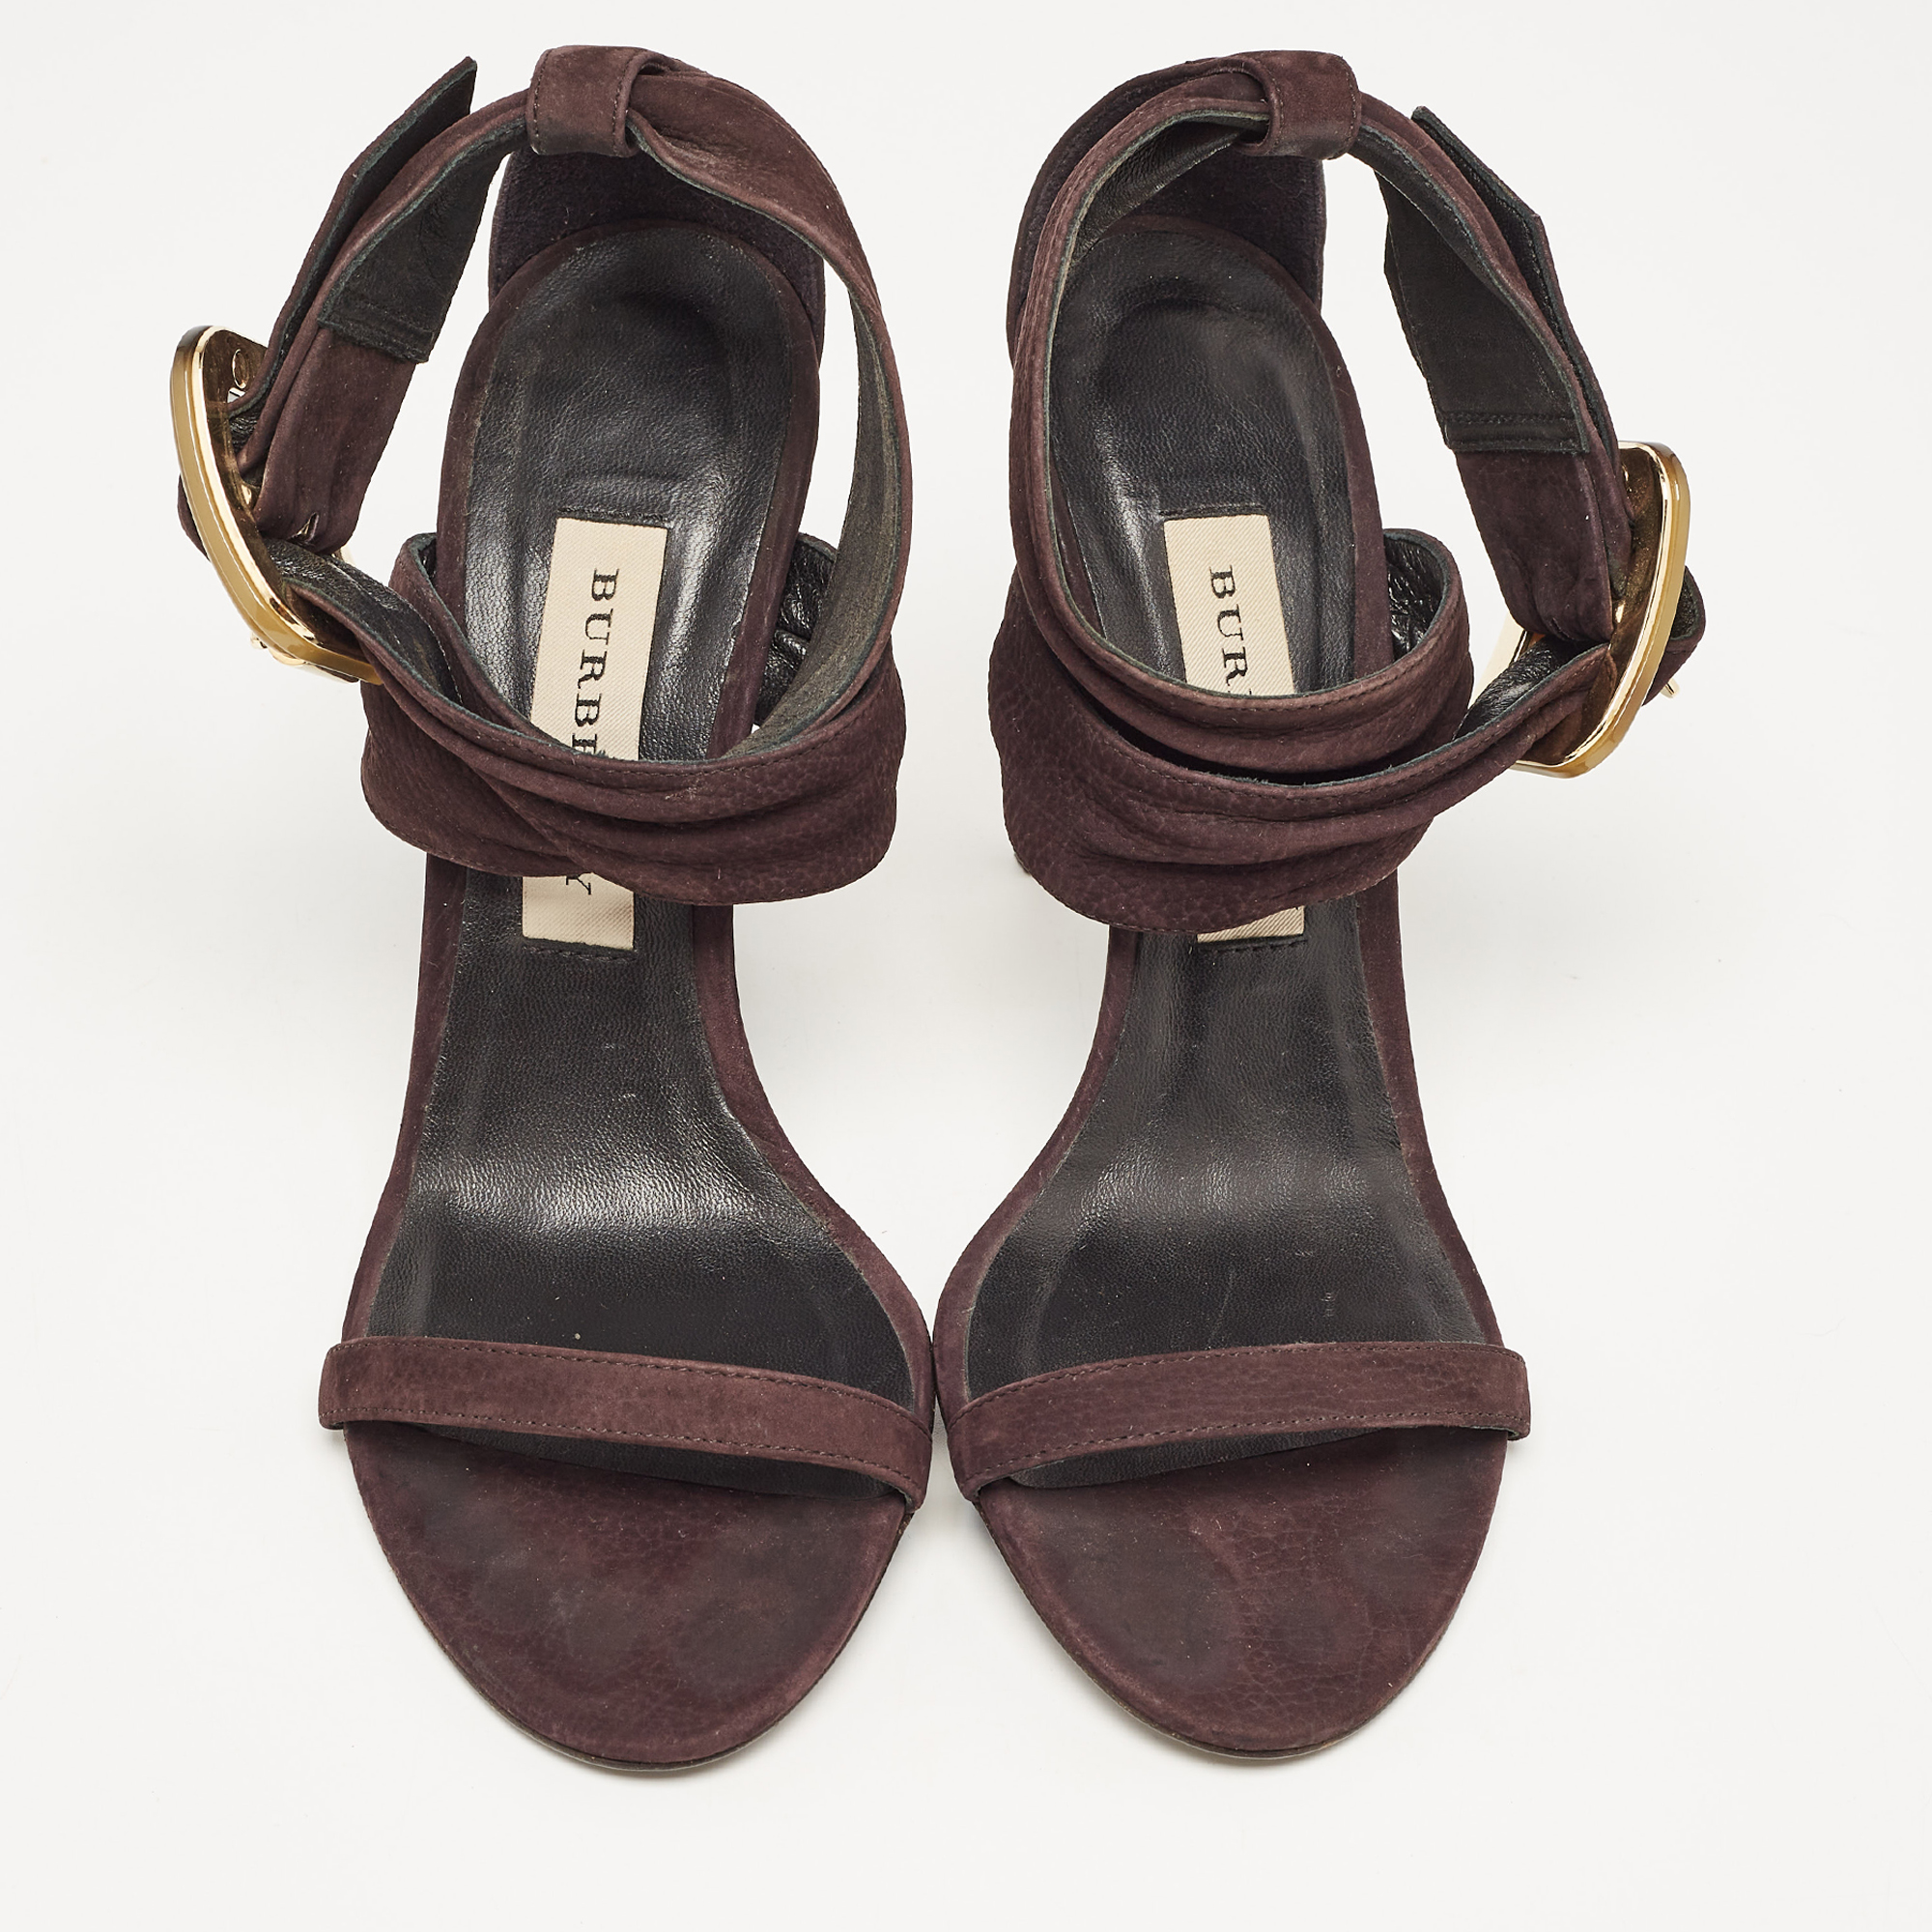 Burberry Purple Suede Buckle Ankle Wrap Sandals Size 37